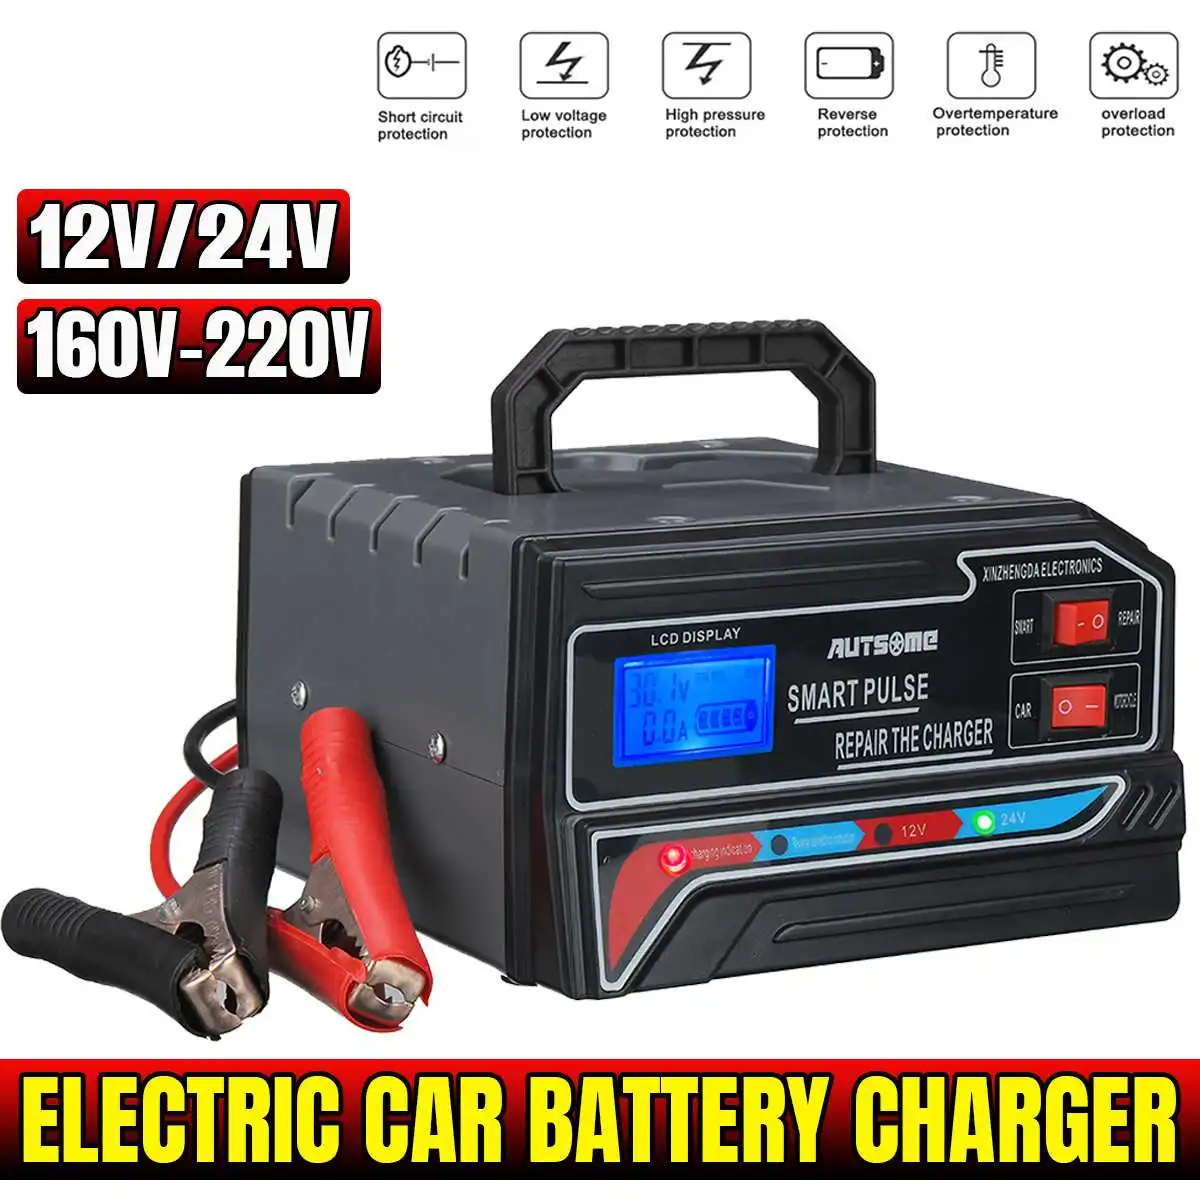 AUTSOME 12V/24V Automobile Motorcycle Universal Electric Car Battery Charger for Cars, Truck,Boats, Motorcycles